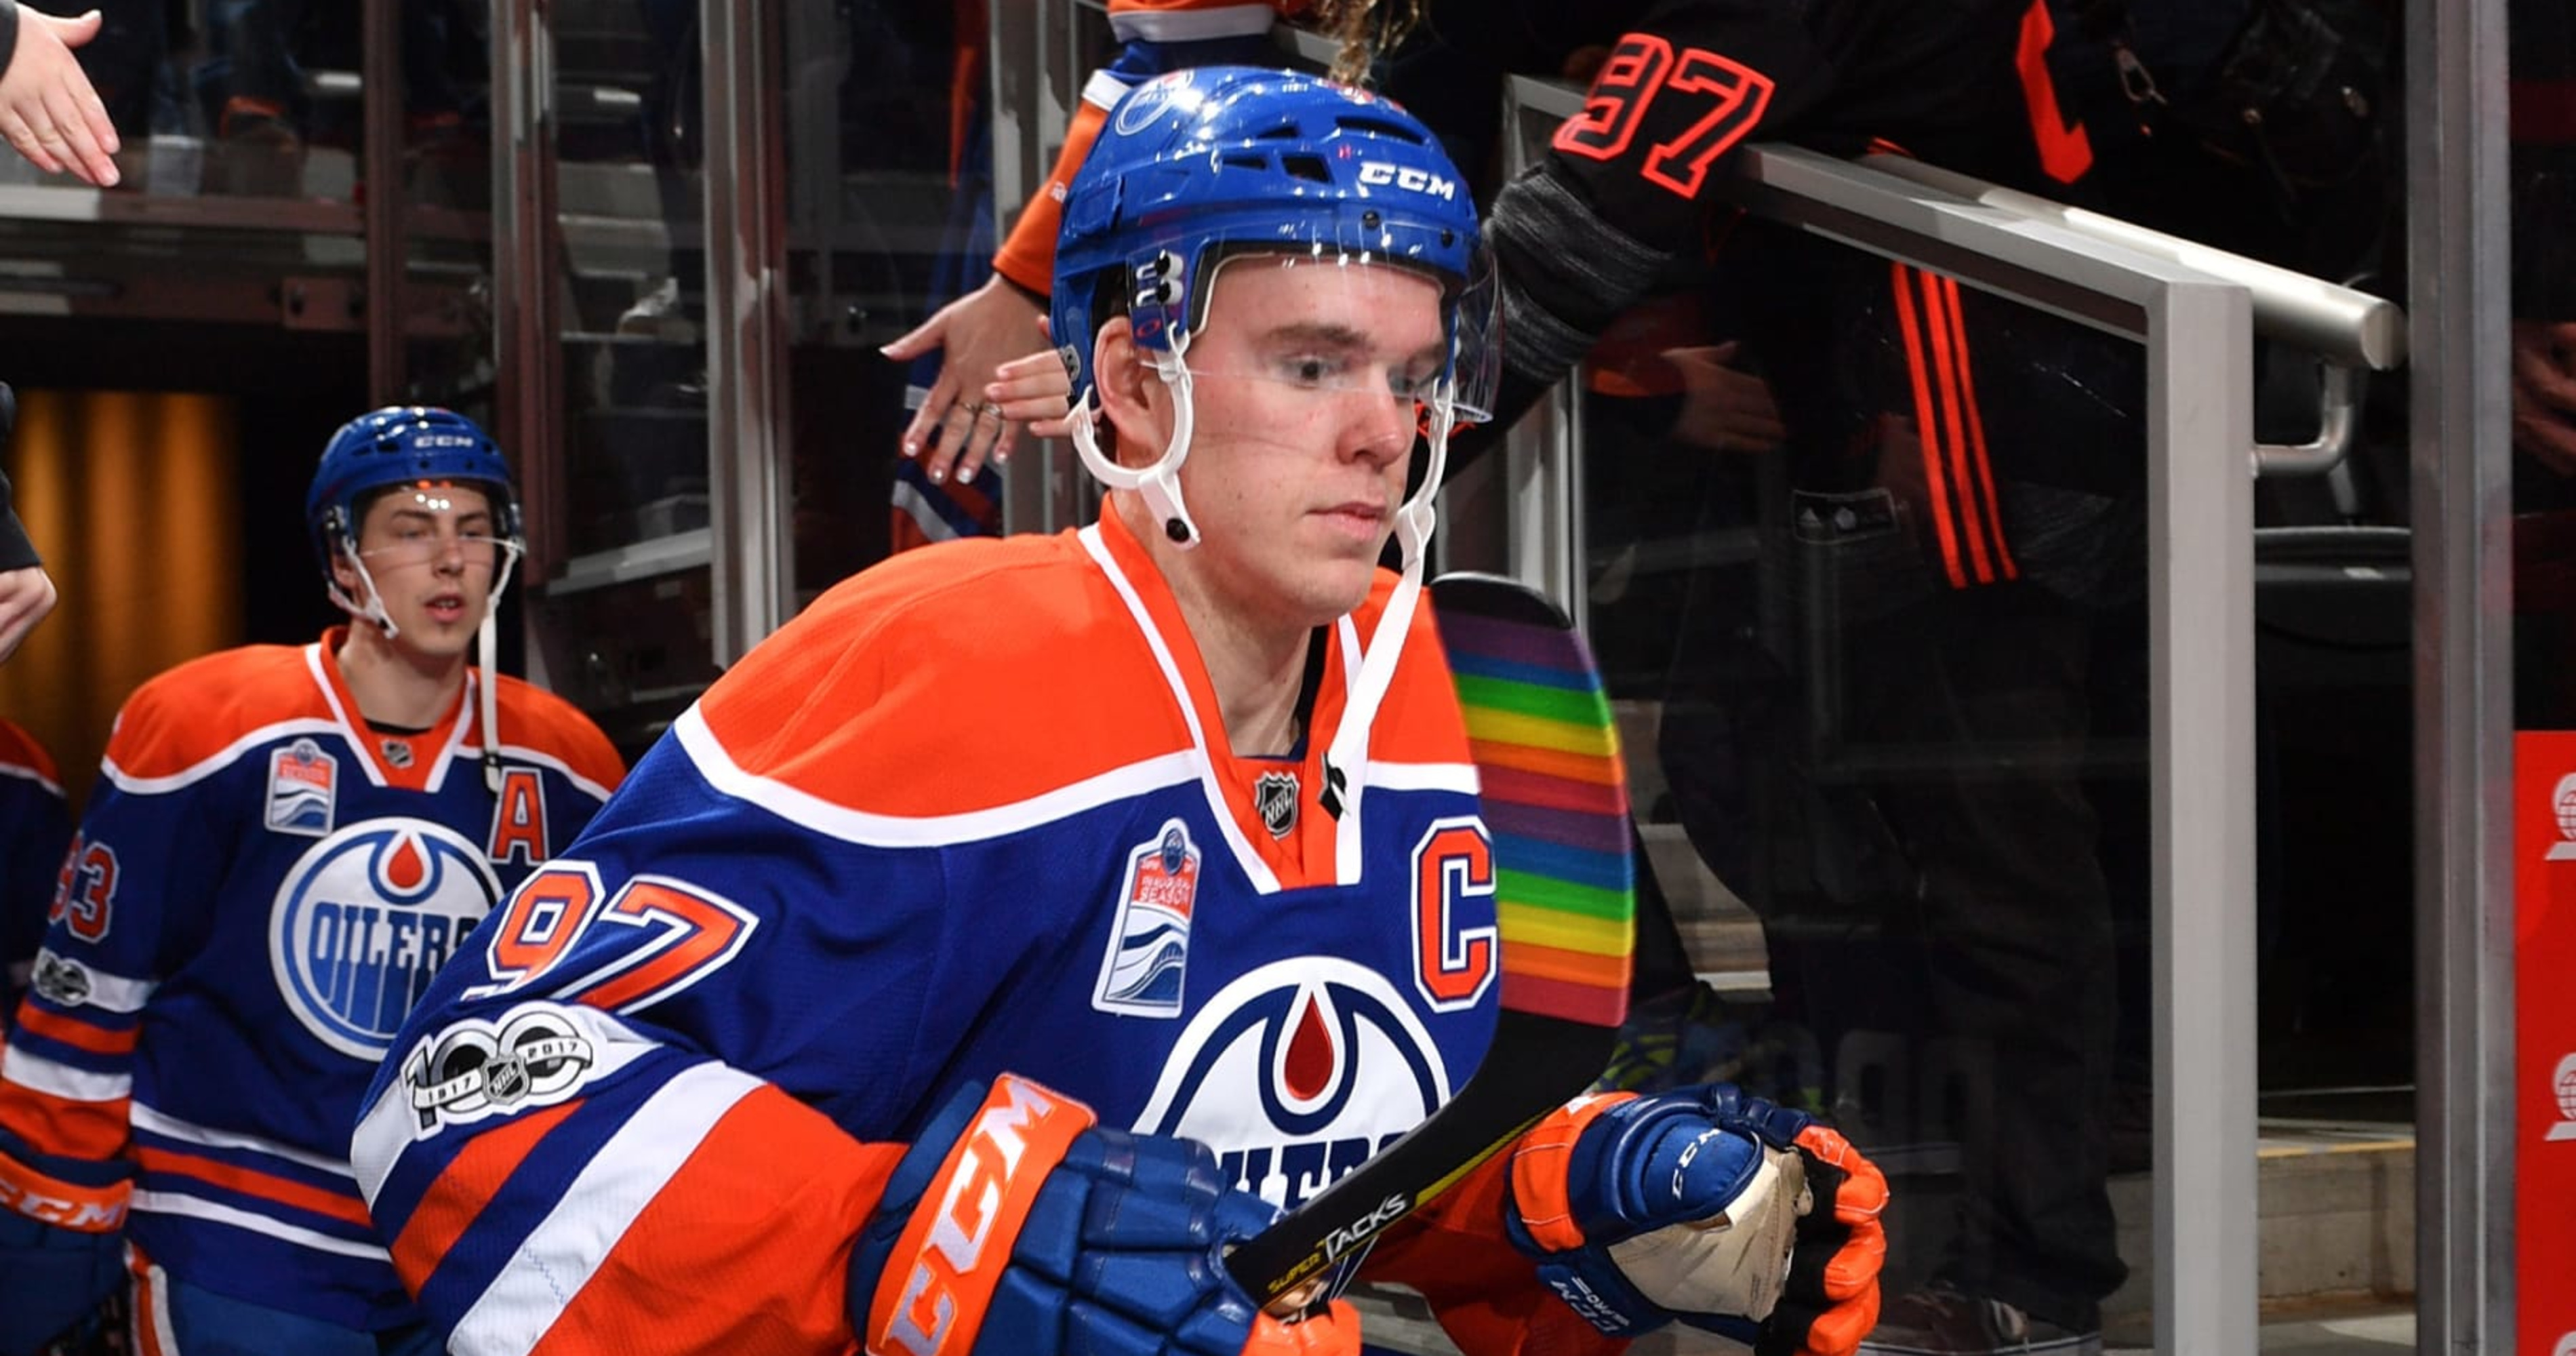 NHL teams, players opt out of Pride jerseys: Employee rights